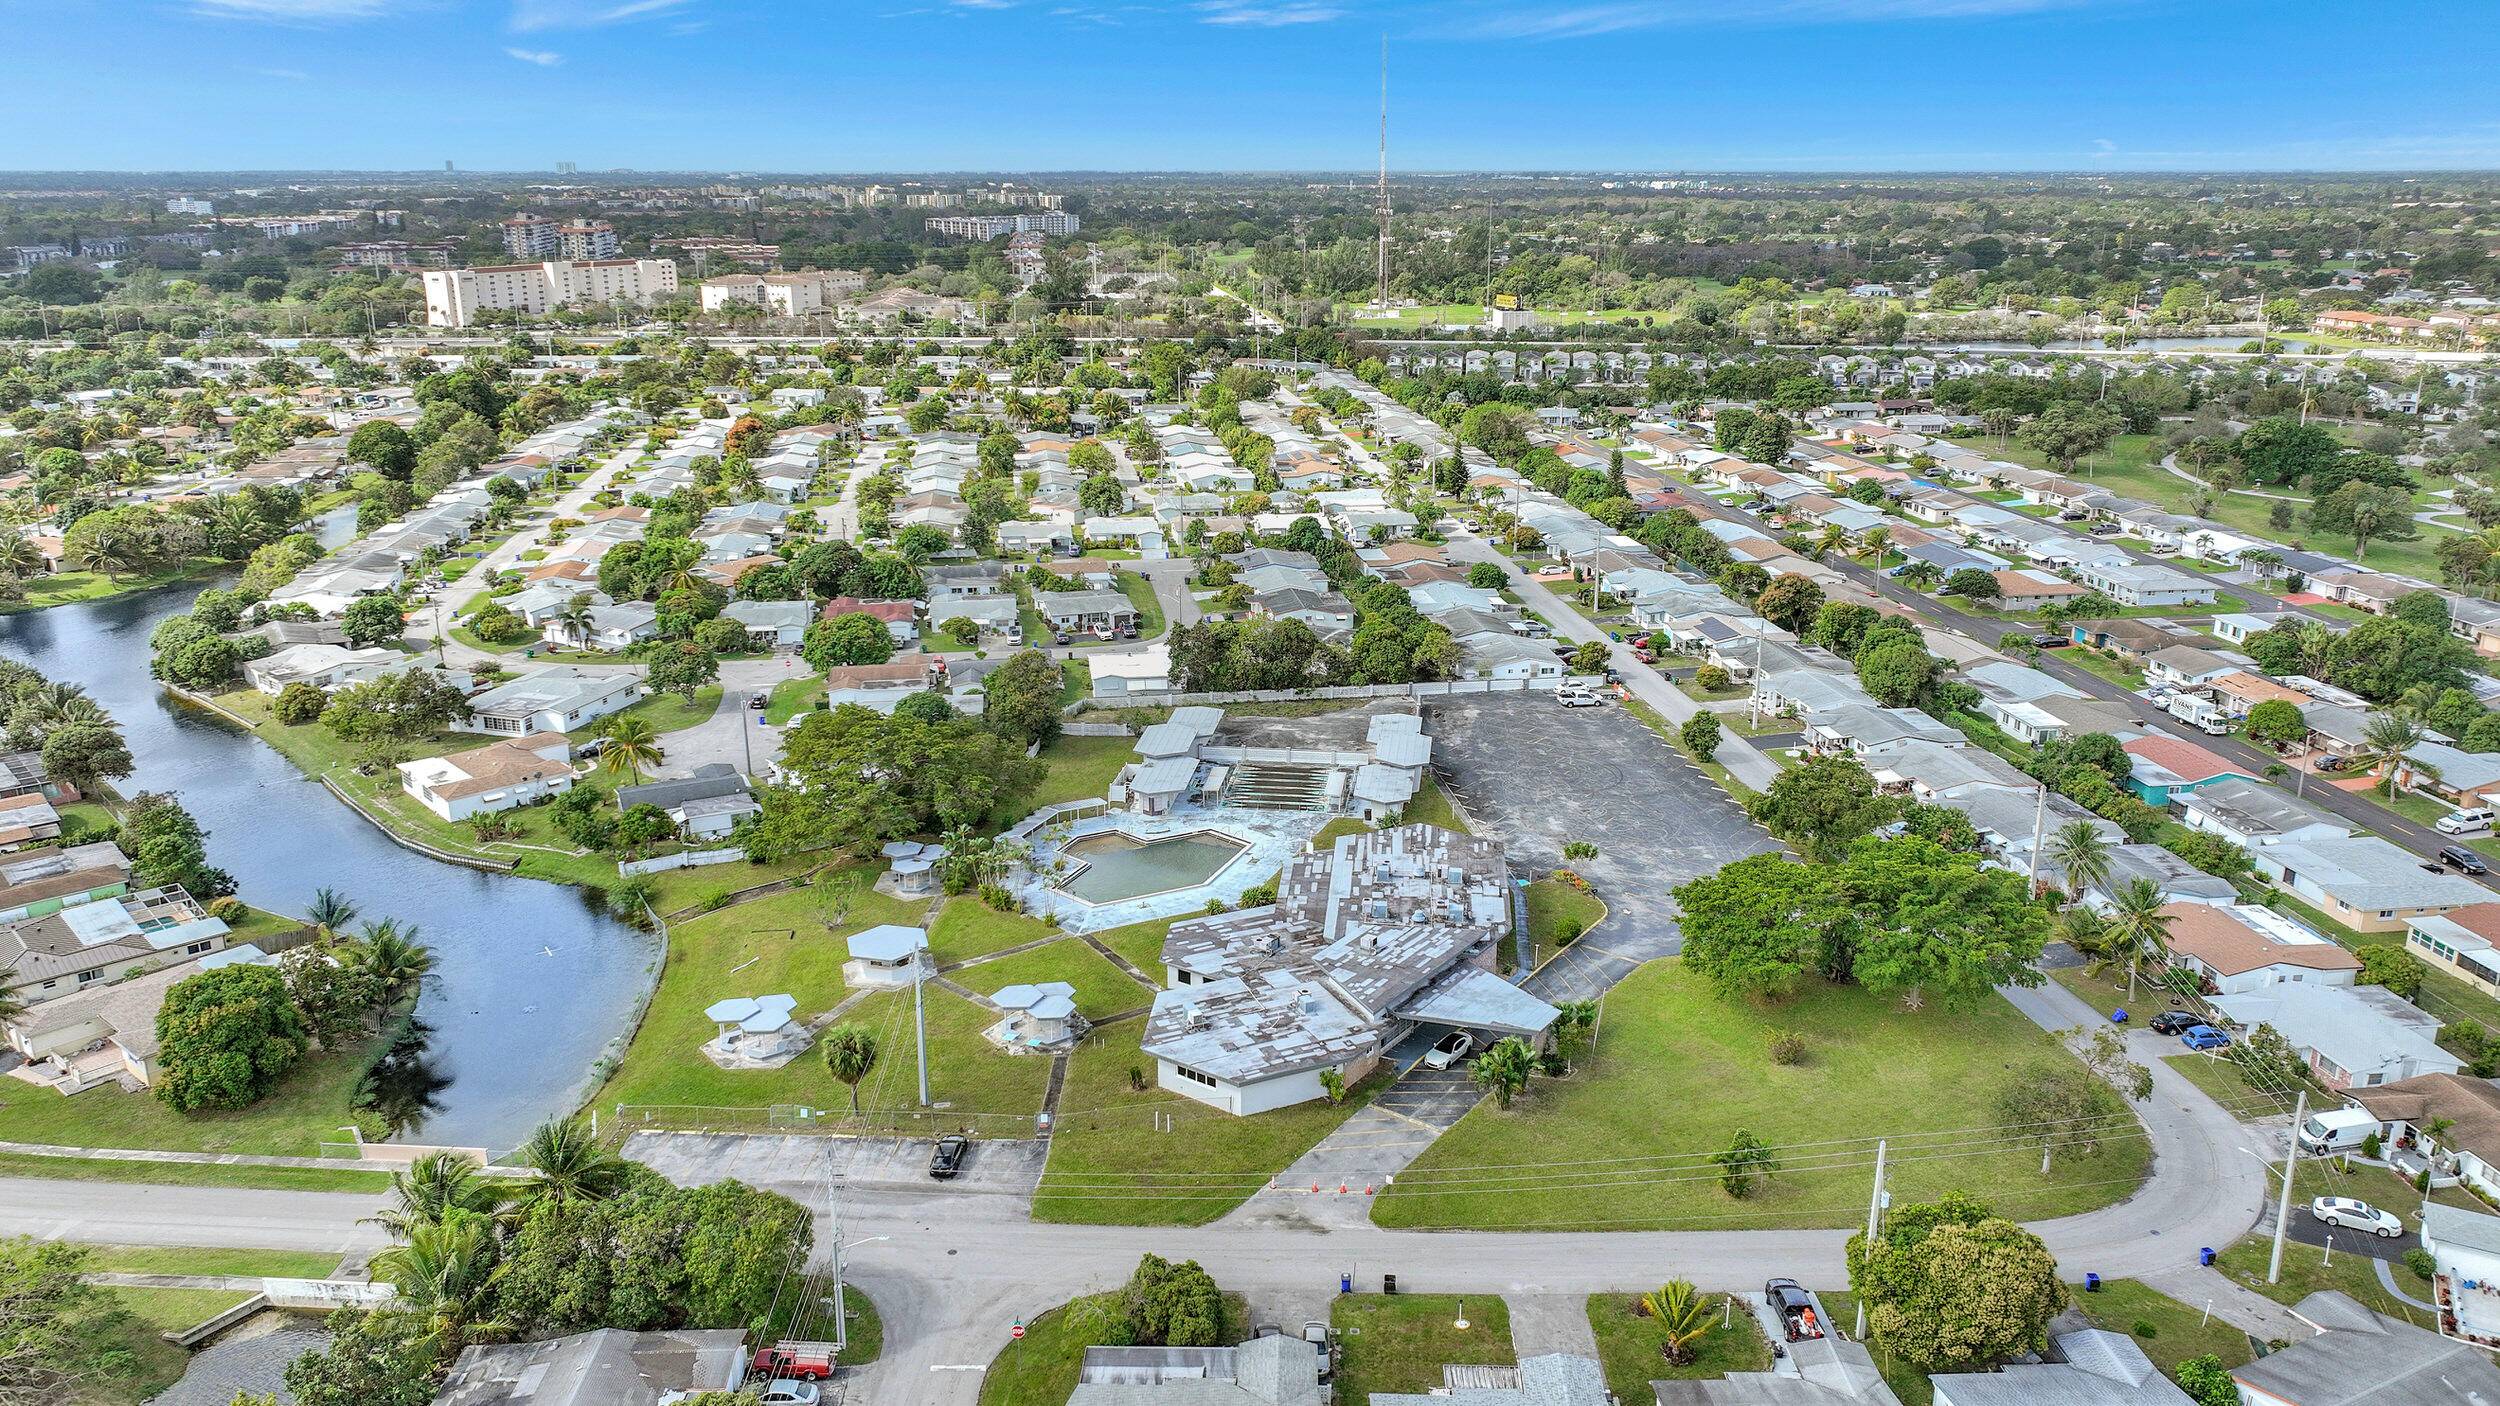 Introducing an exceptional property located at 4301 NW 48th Ave in Lauderdale Lakes, offering a unique opportunity for those seeking a versatile space.